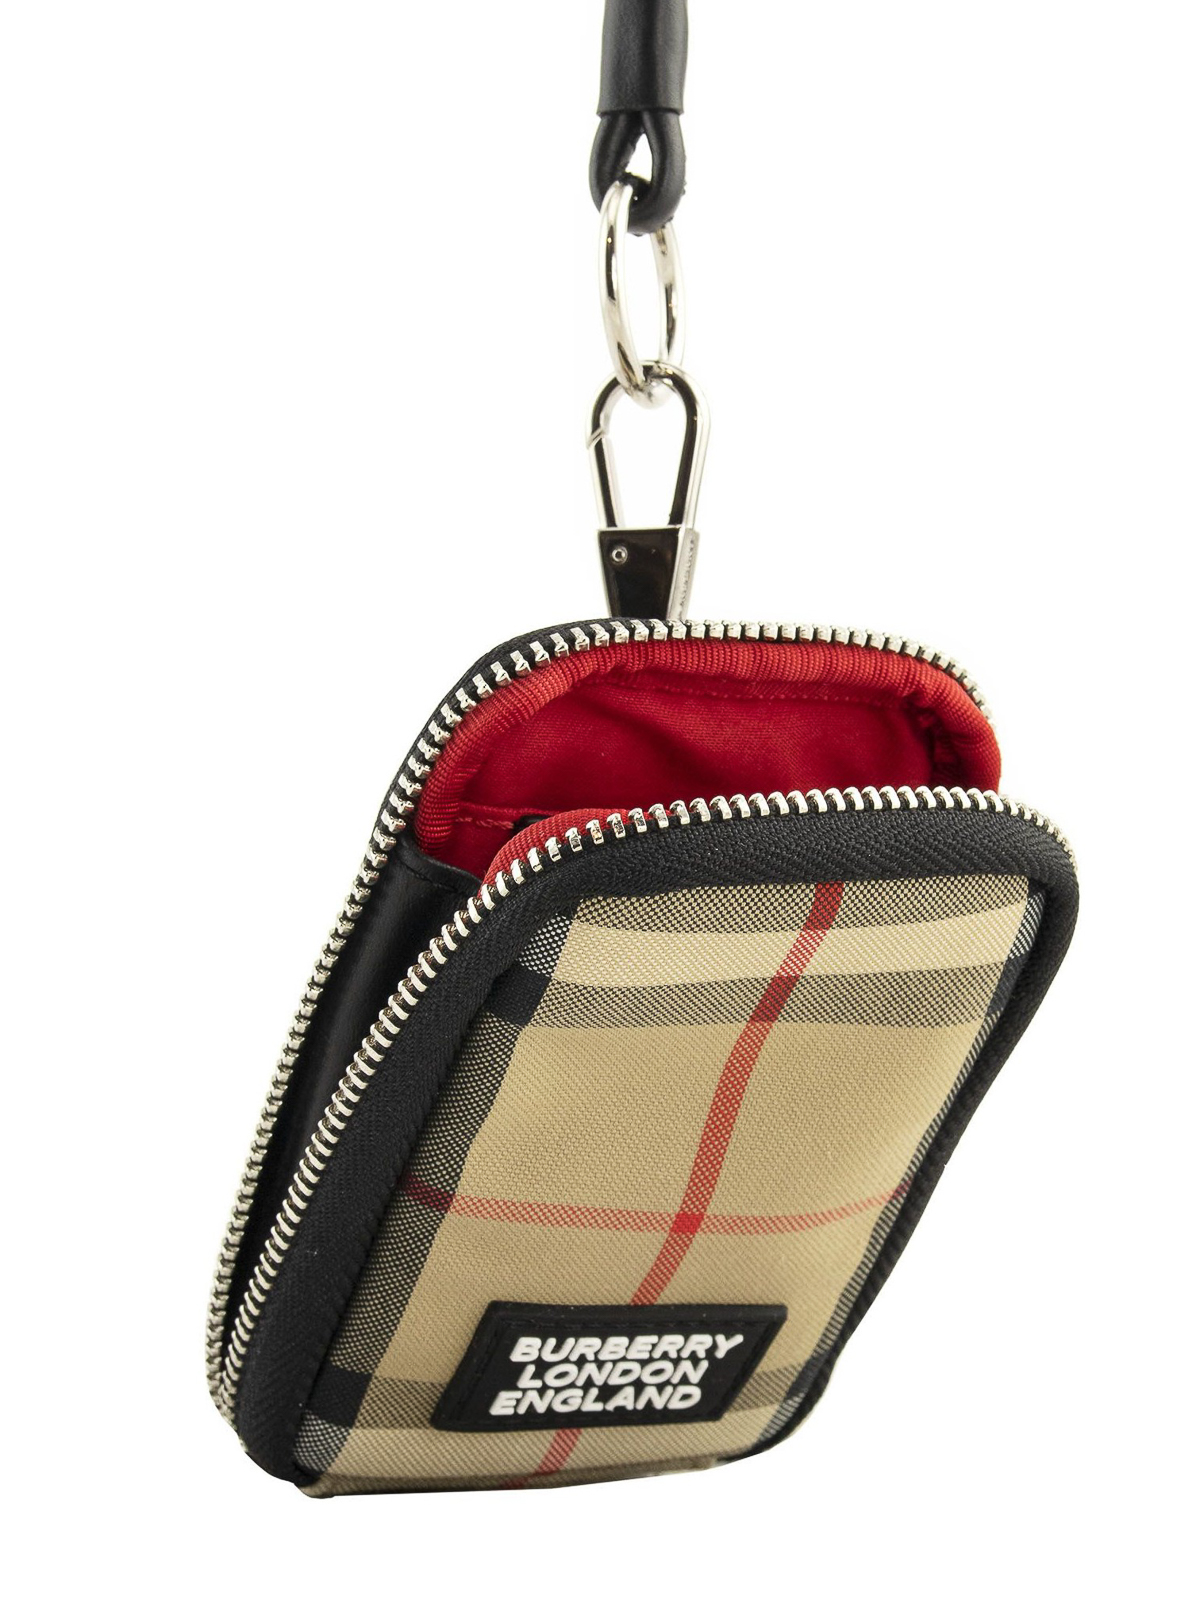 Burberry Card case with lanyard, Men's Accessories